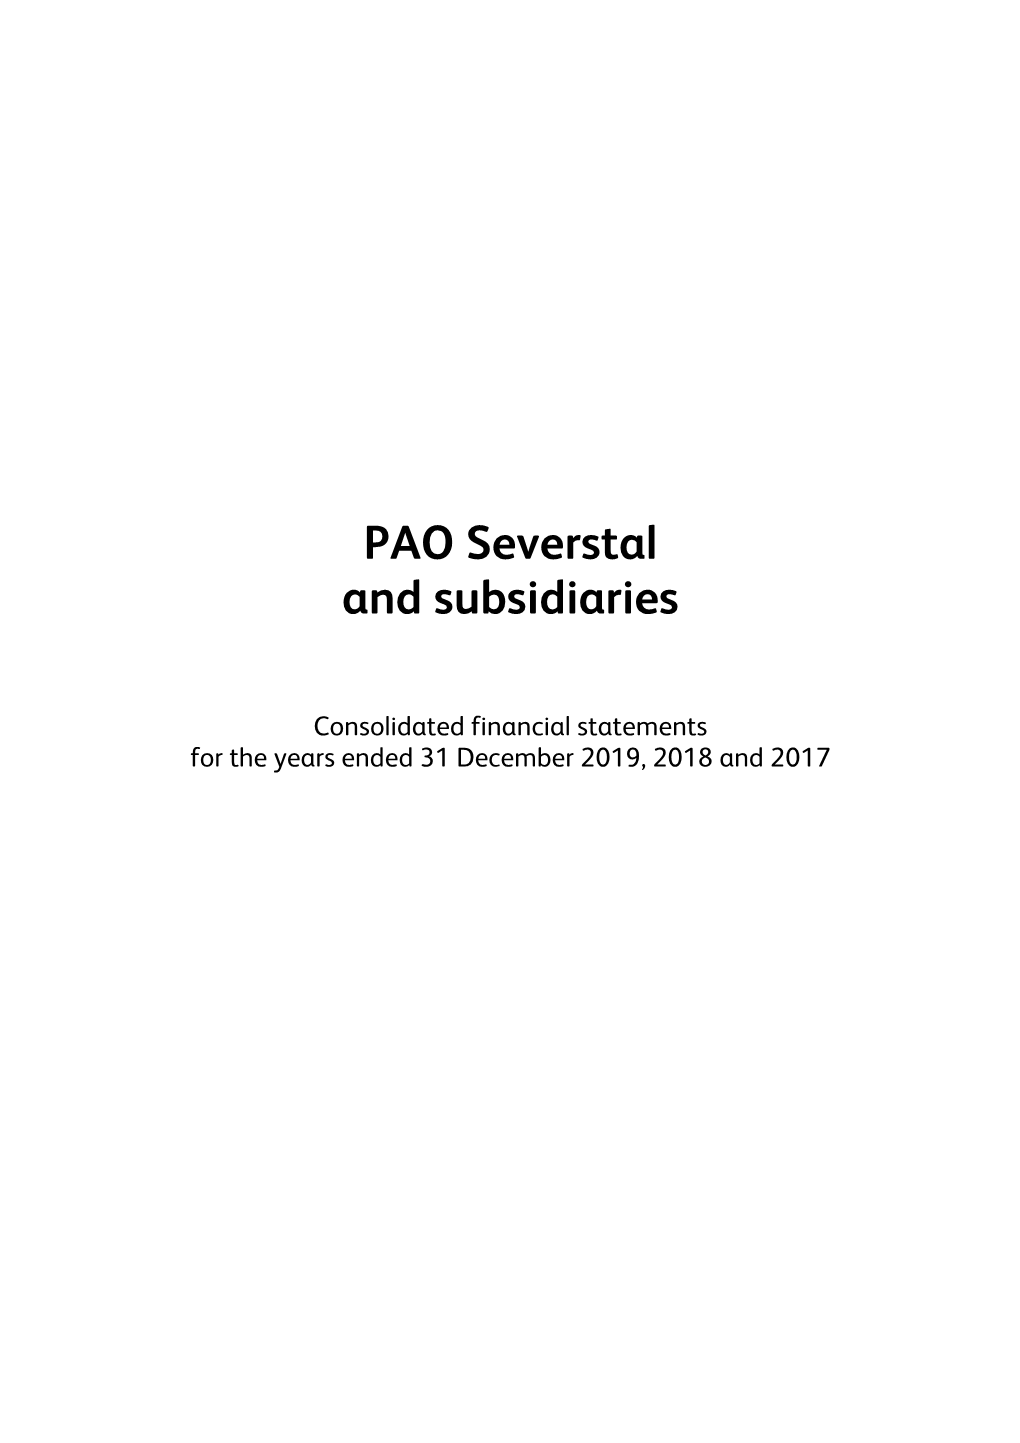 PAO Severstal and Subsidiaries